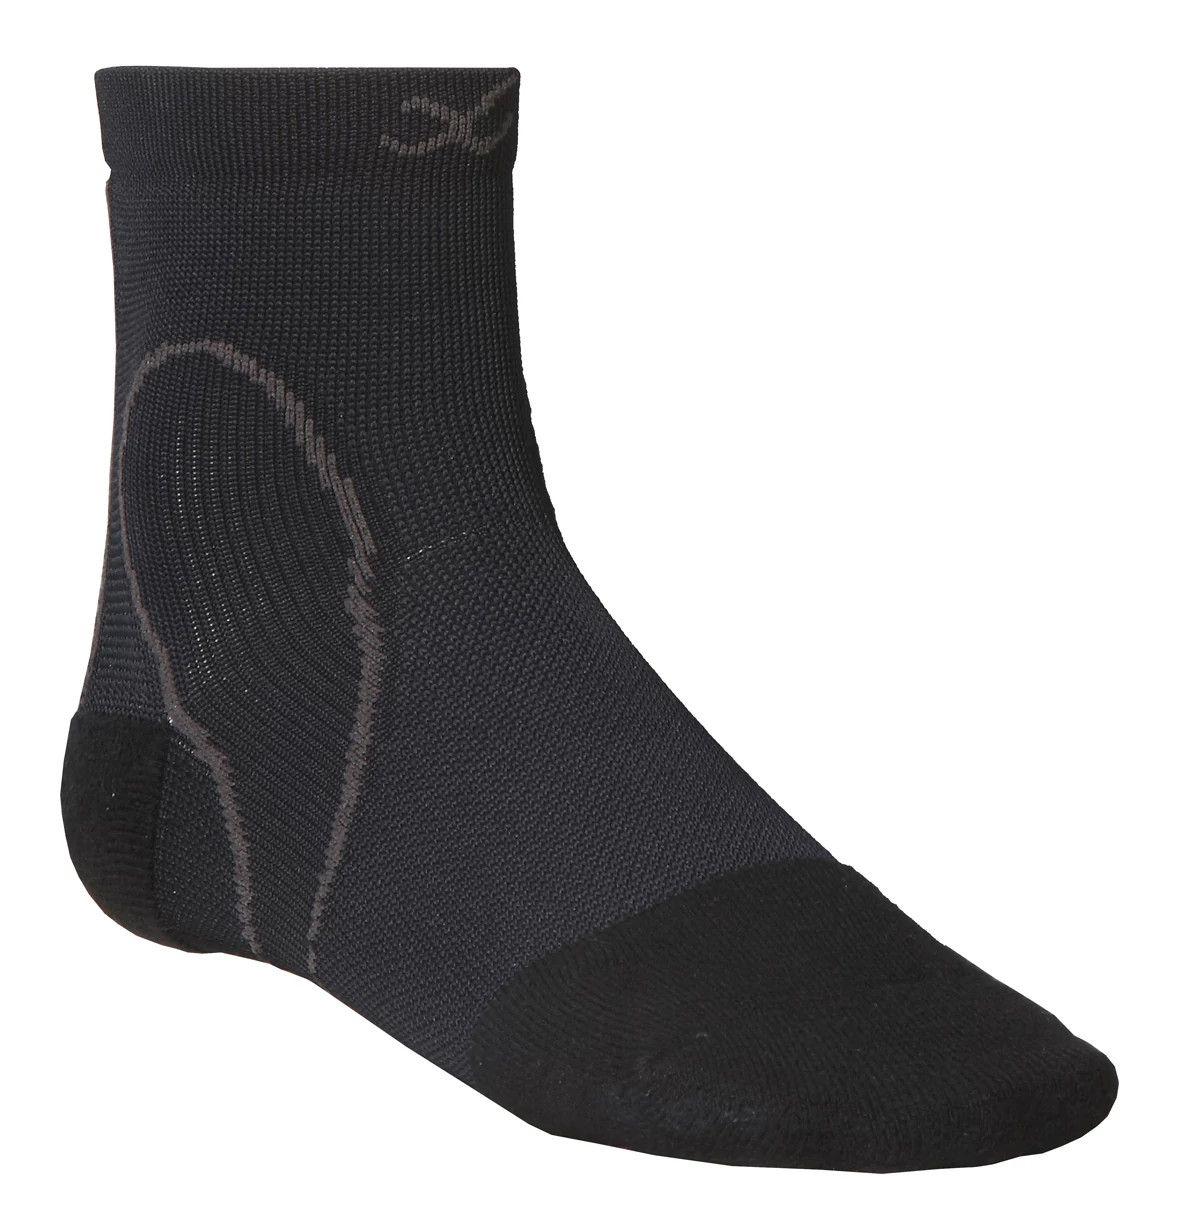 CW-X Performx Ankle Socks Injury Recovery